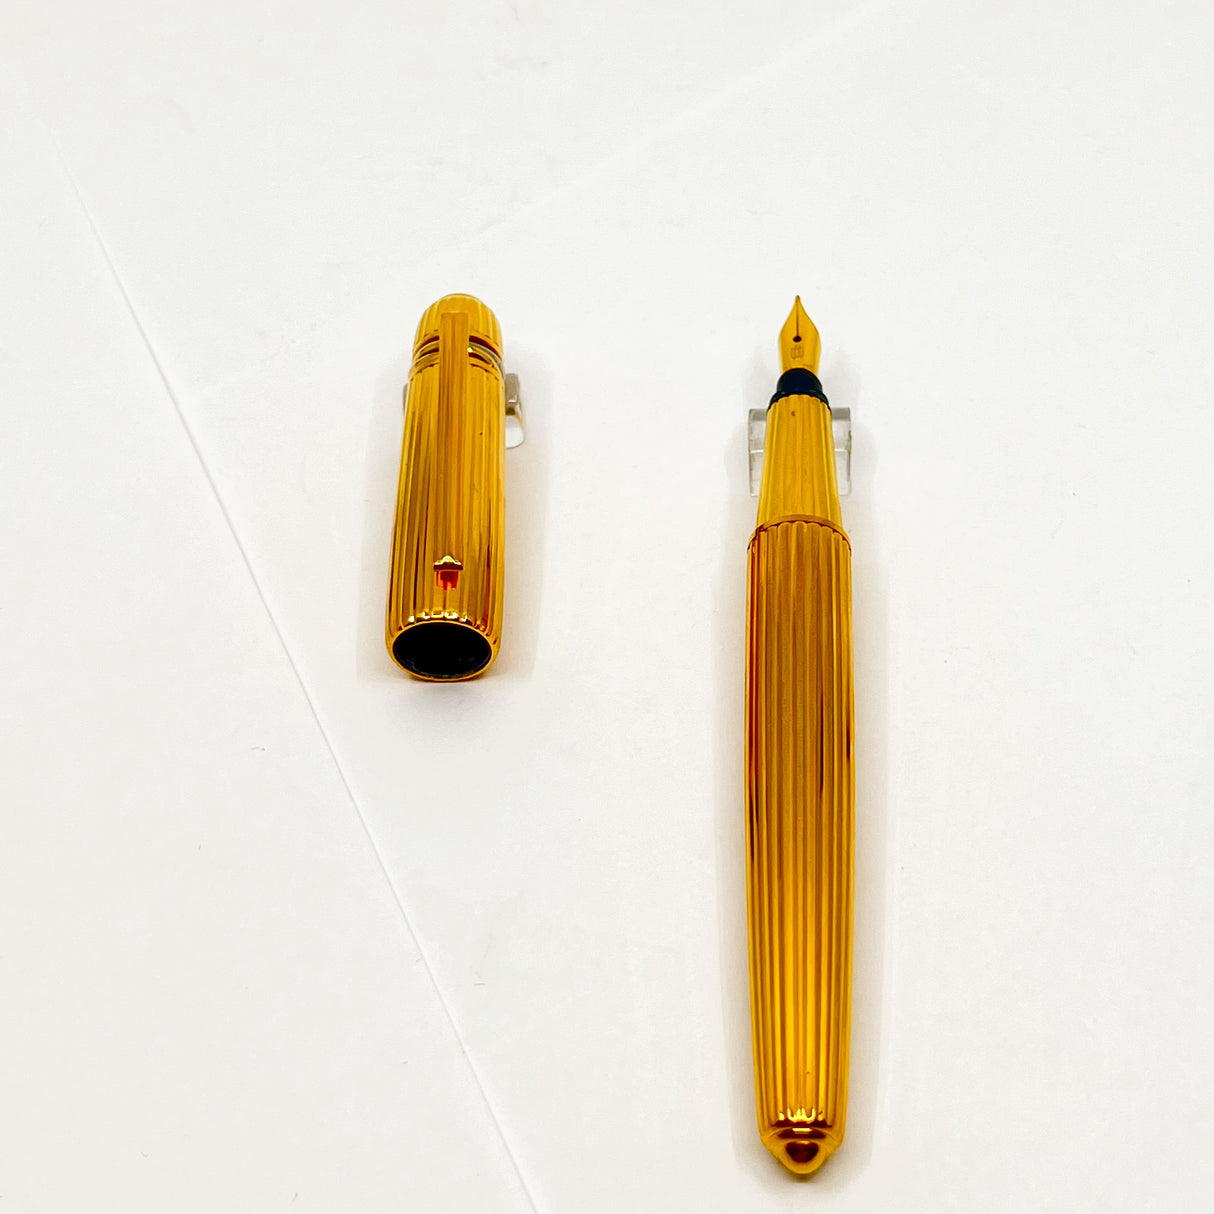 Cartier Pasha Gold-Plated Fluted Fountain Pen